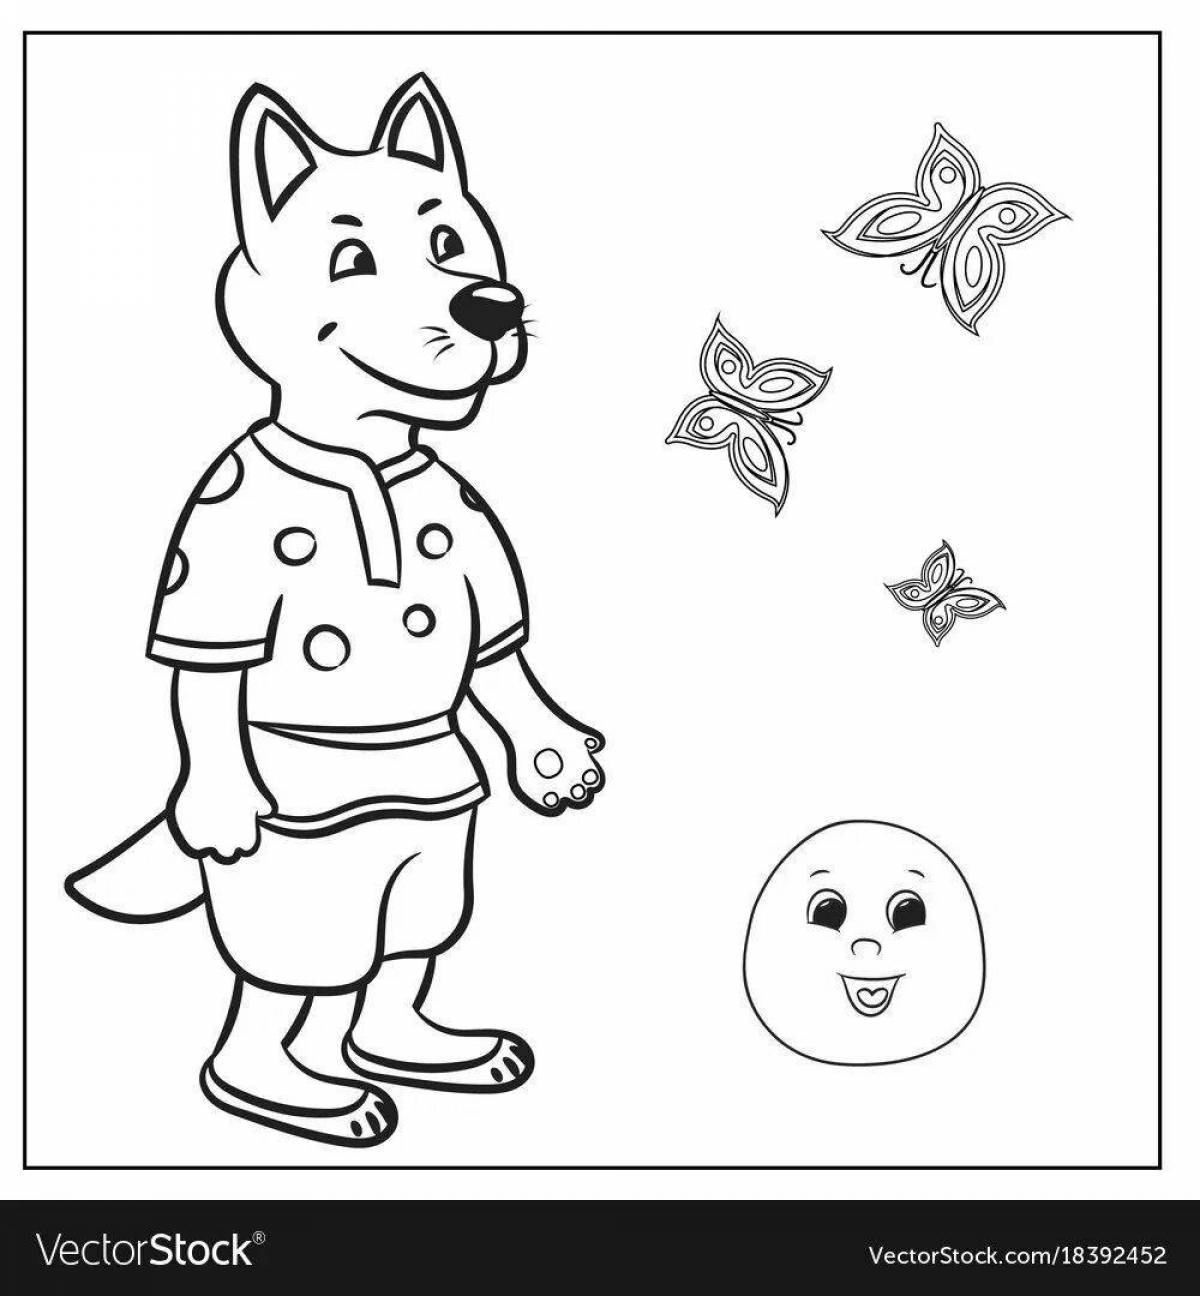 Frightening wolf coloring page